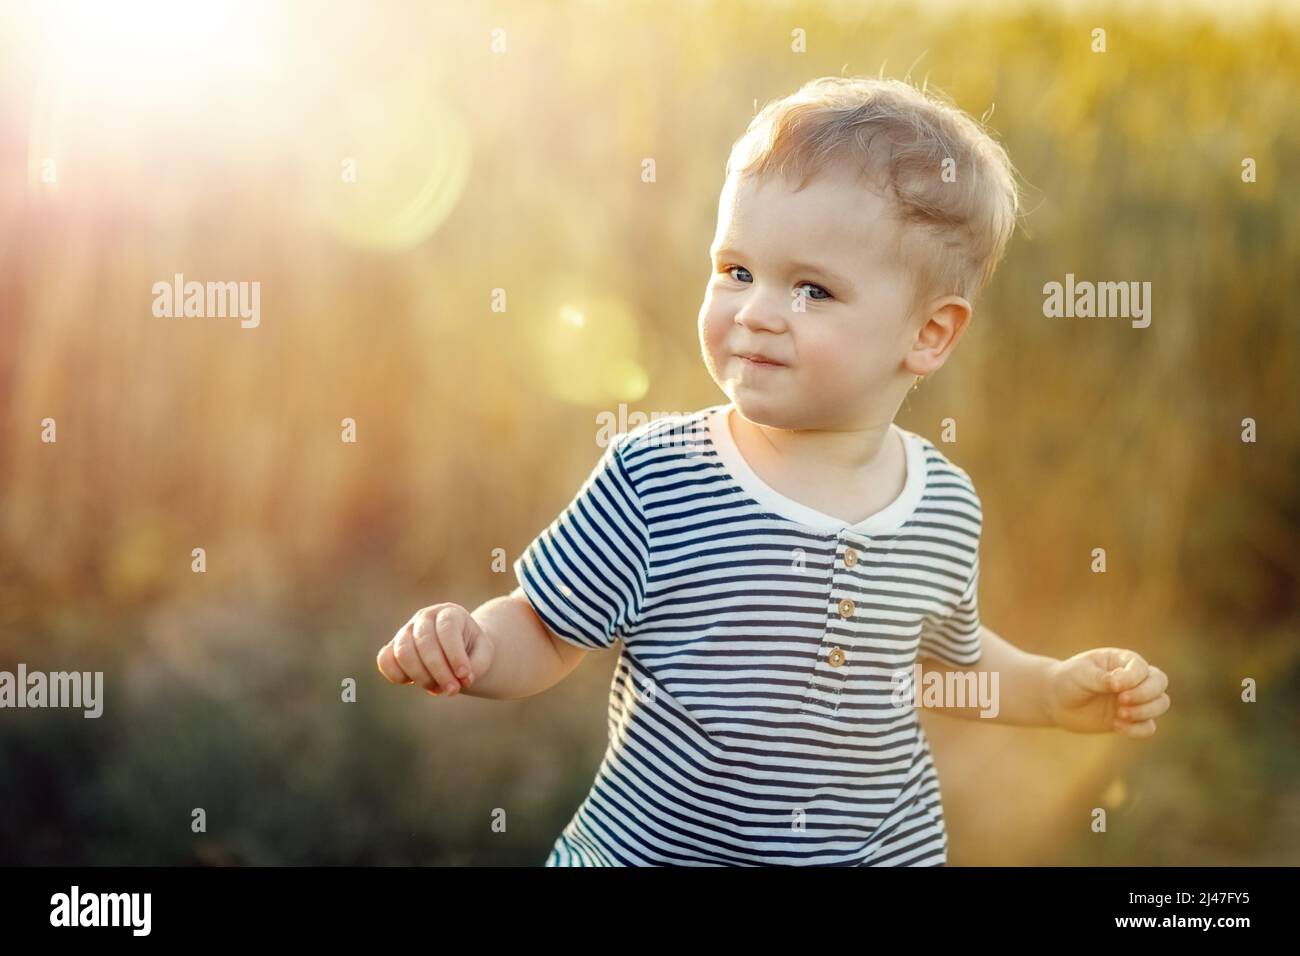 Portrait of a smiling little boy in the background of golden rye in evening light. Stock Photo